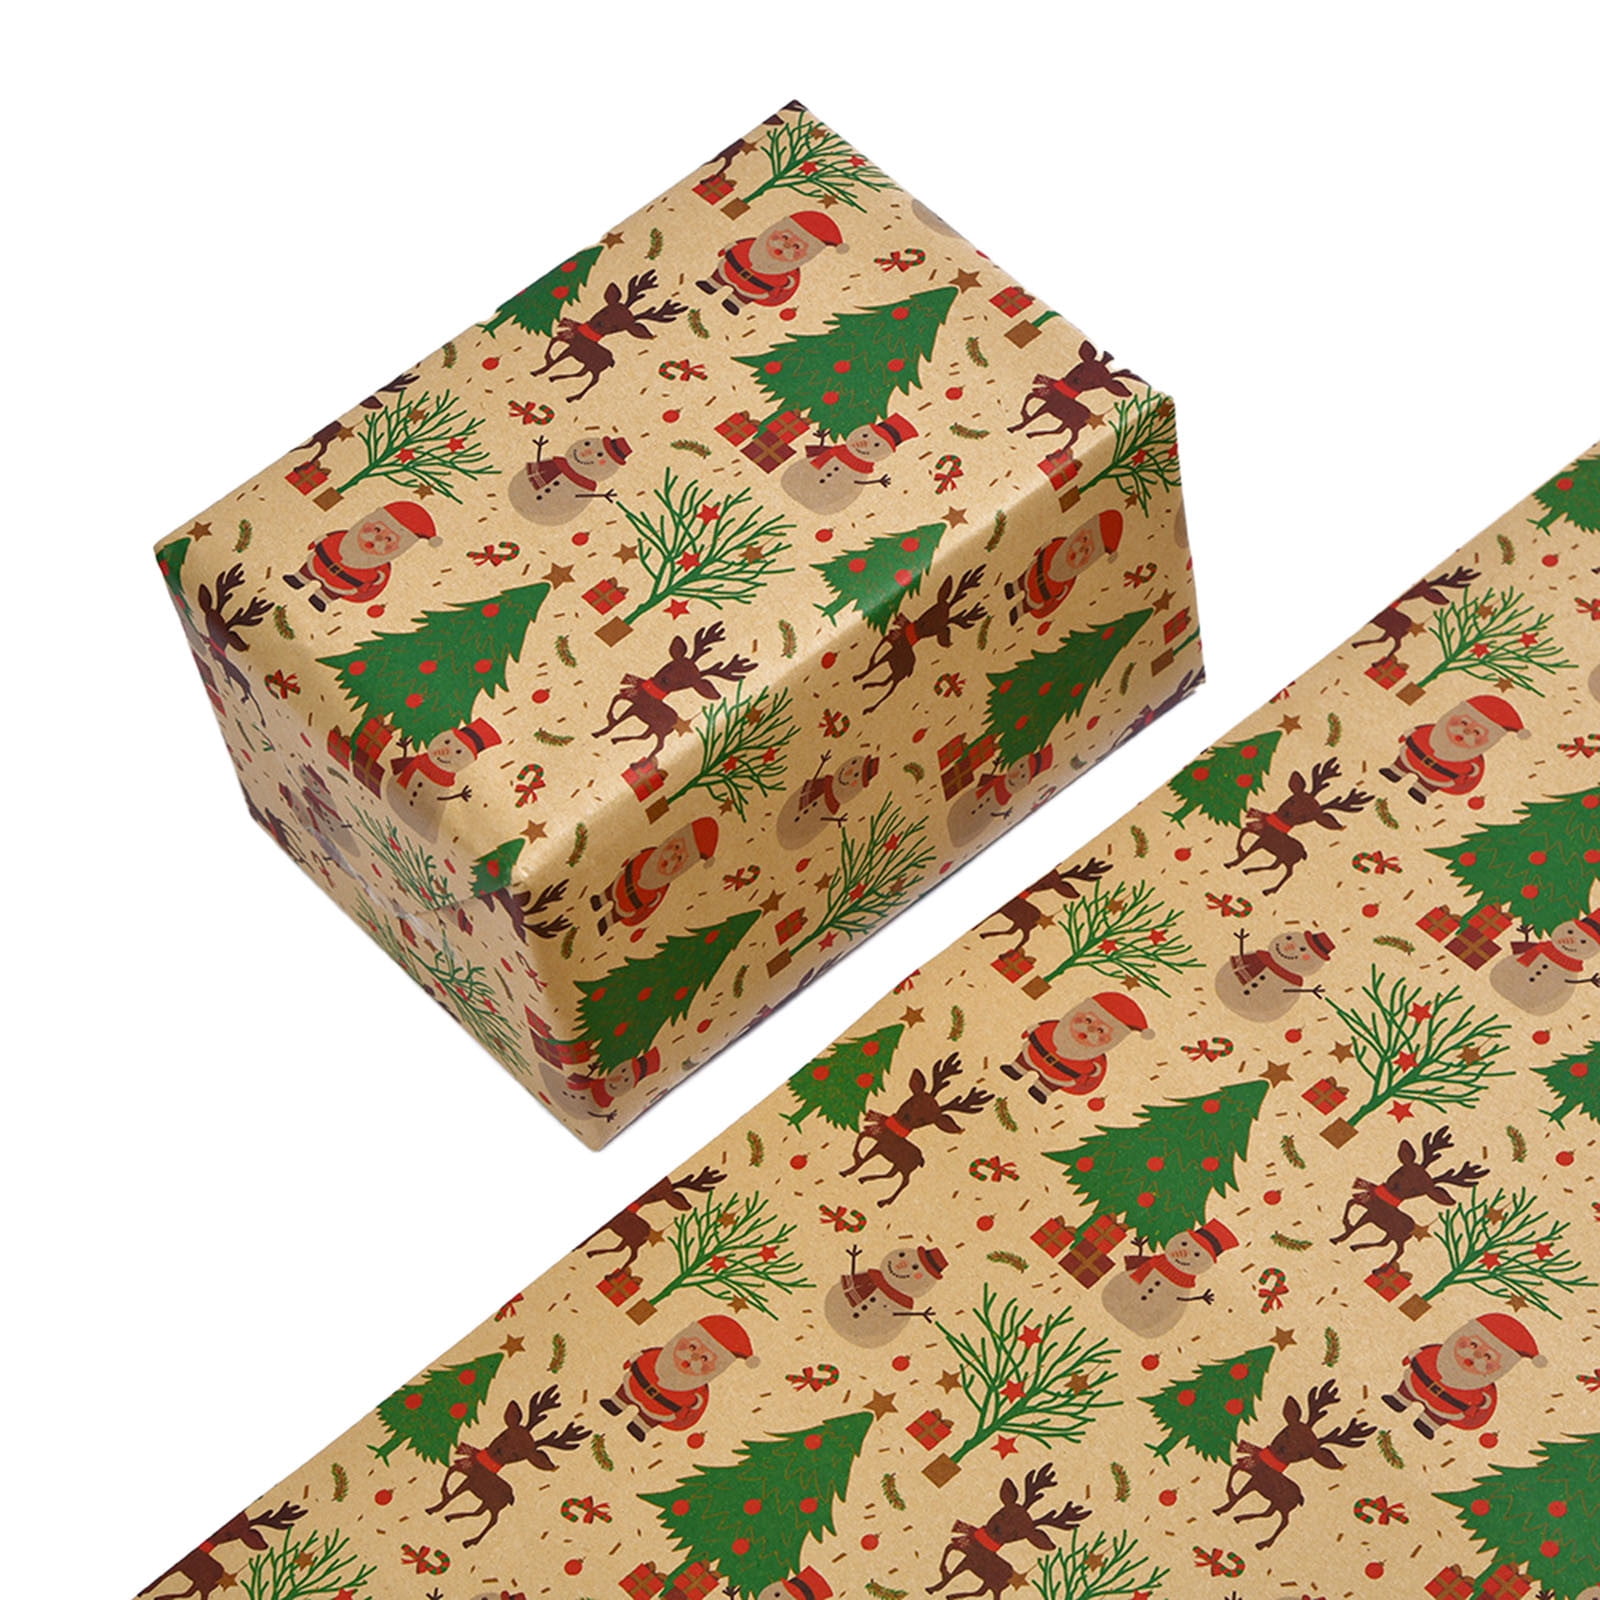 5pcs Christmas Gift Wrapping Paper Diy Gift Box Packaging Papers 50x70cm  Elk Snowflake Xmas Tree Pattern Craft Paper - AliExpress